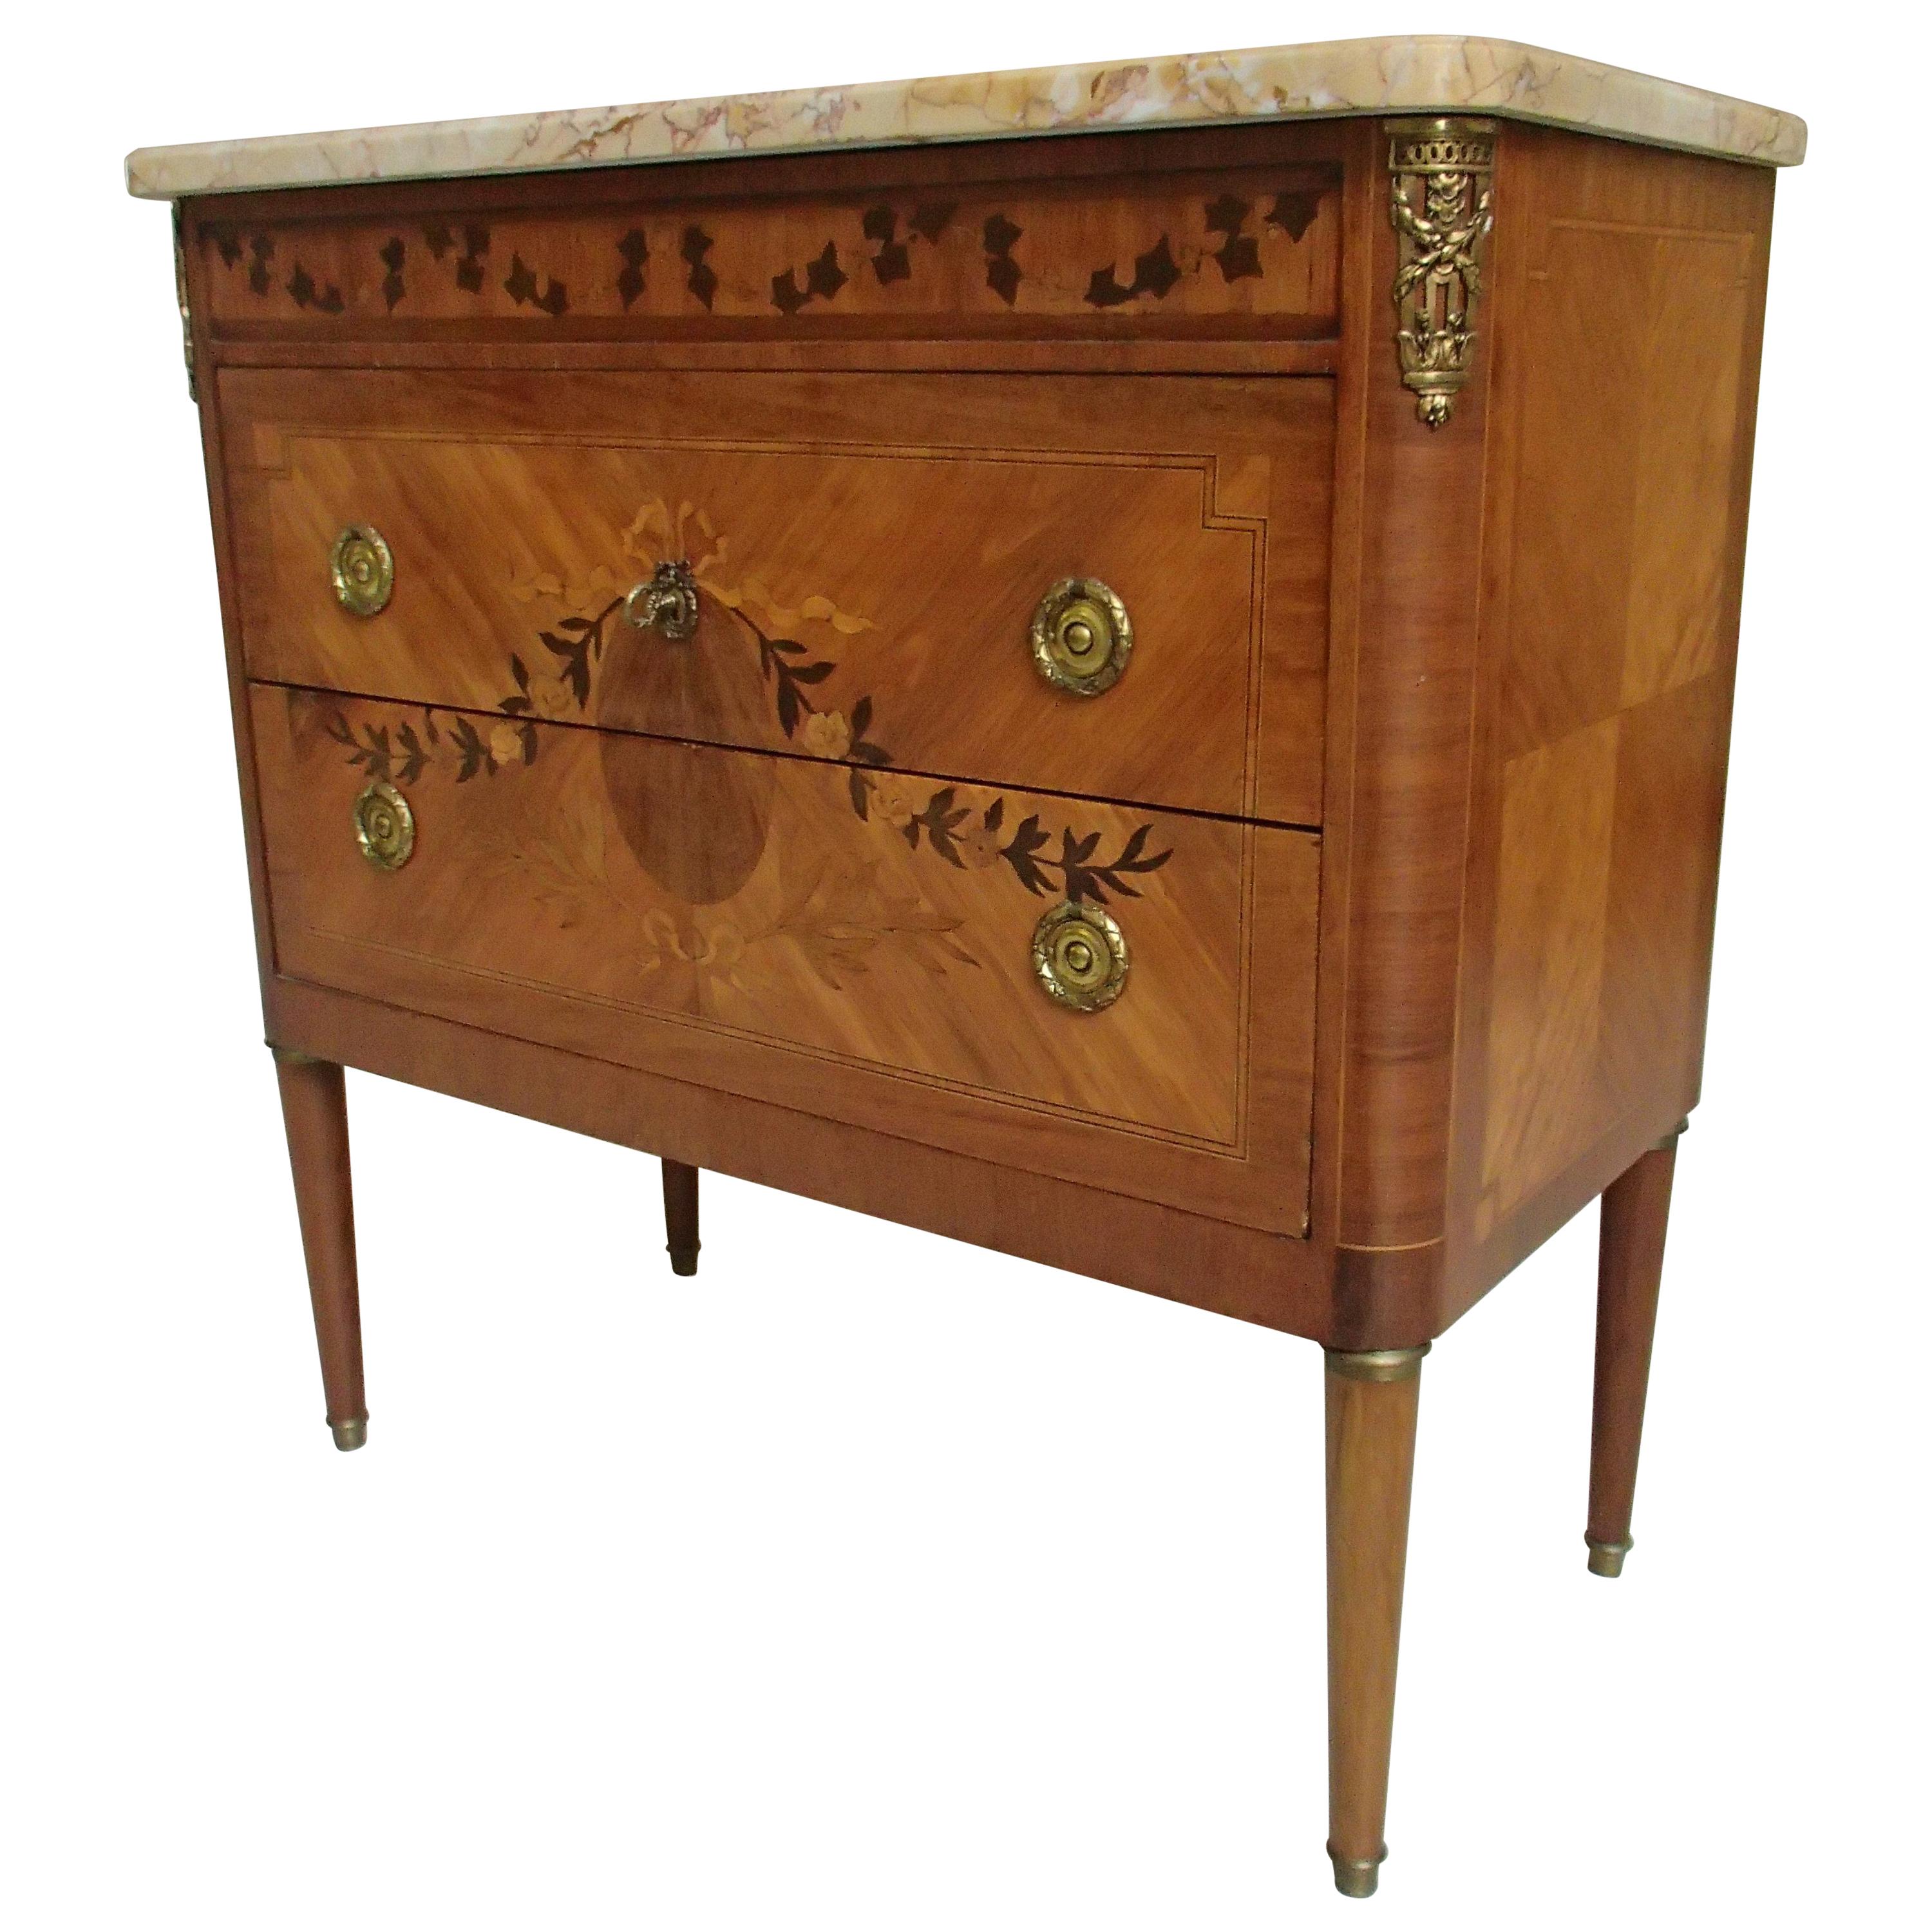 19th Century Chest of Drawers Louis XVI Style by Mercier Freres, Paris